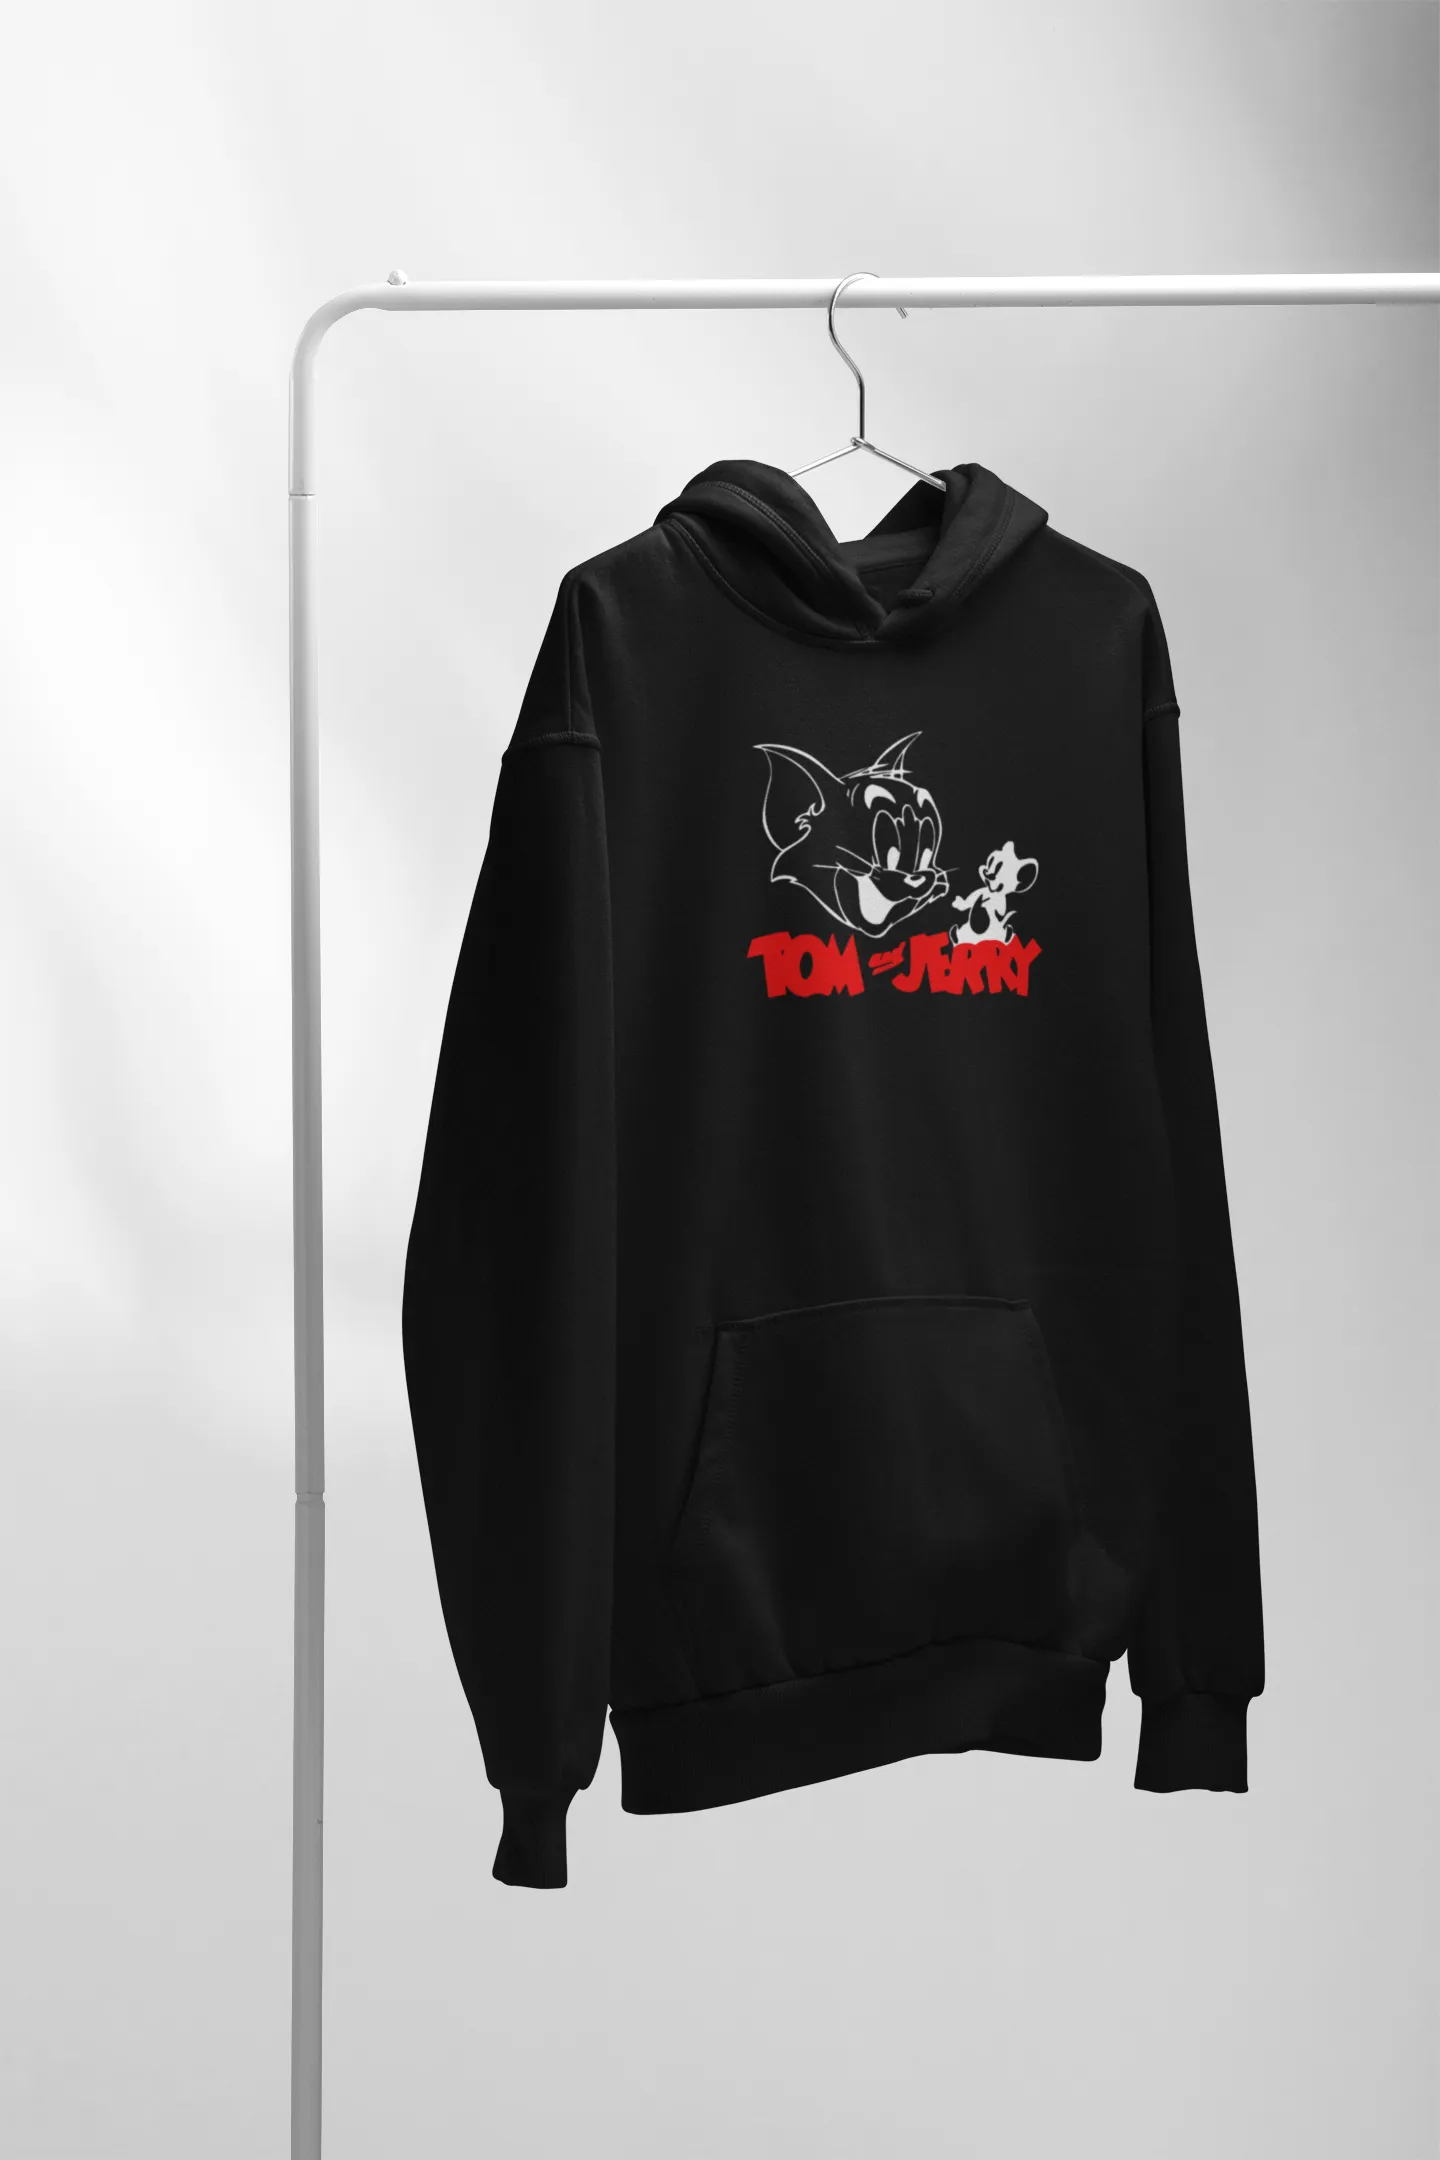 Buy Tom And Jerry Hoodie Black S at best price in India - CodesWear.com